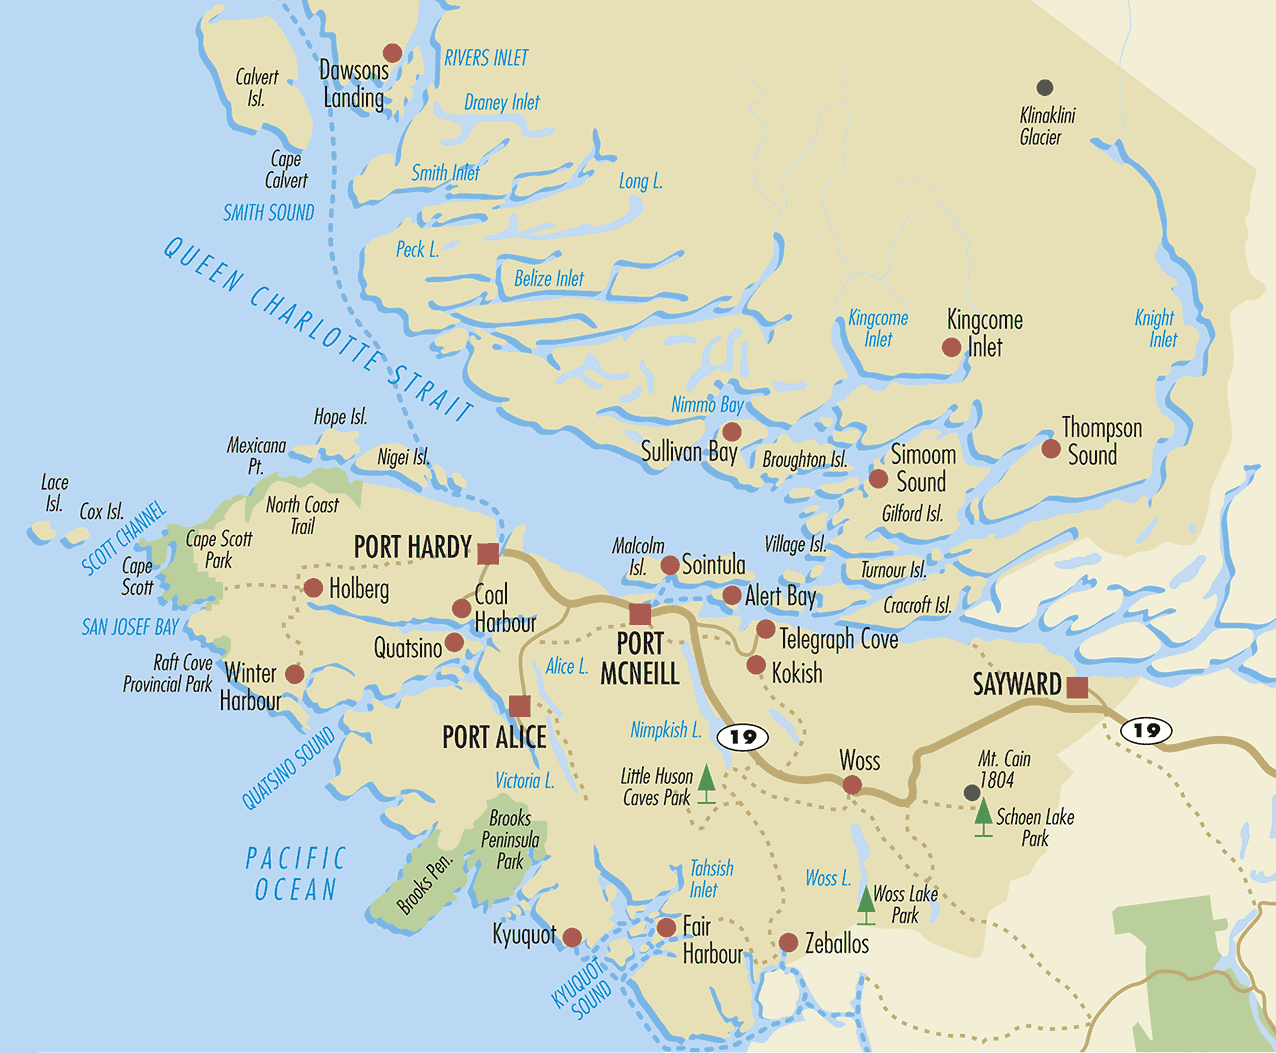 Vancouver Island Trail Map